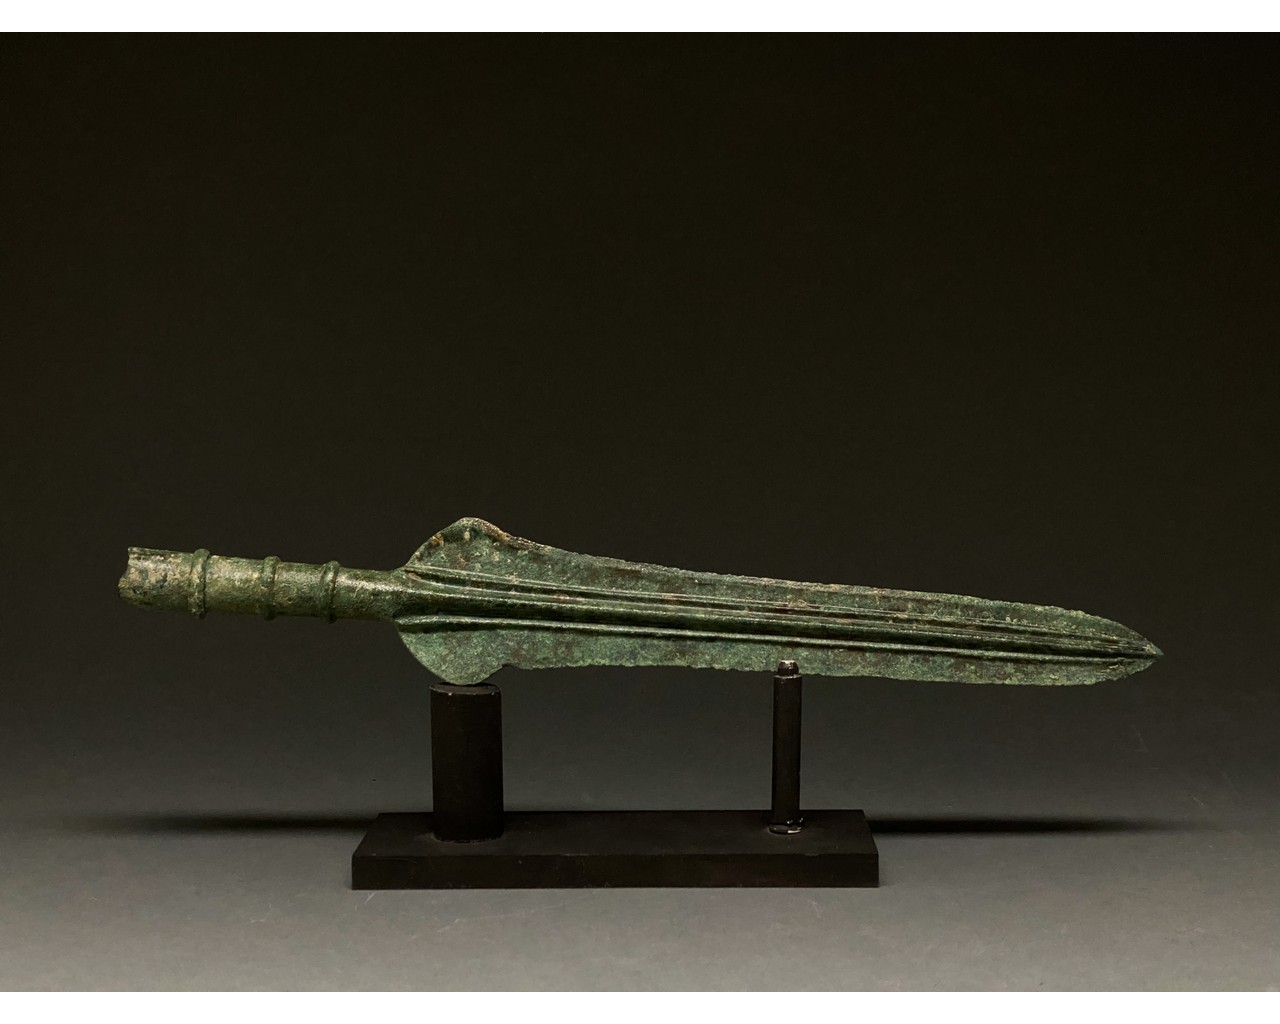 MAGNIFICENT ANCIENT BRONZE DECORATED SPEAR ON STAND